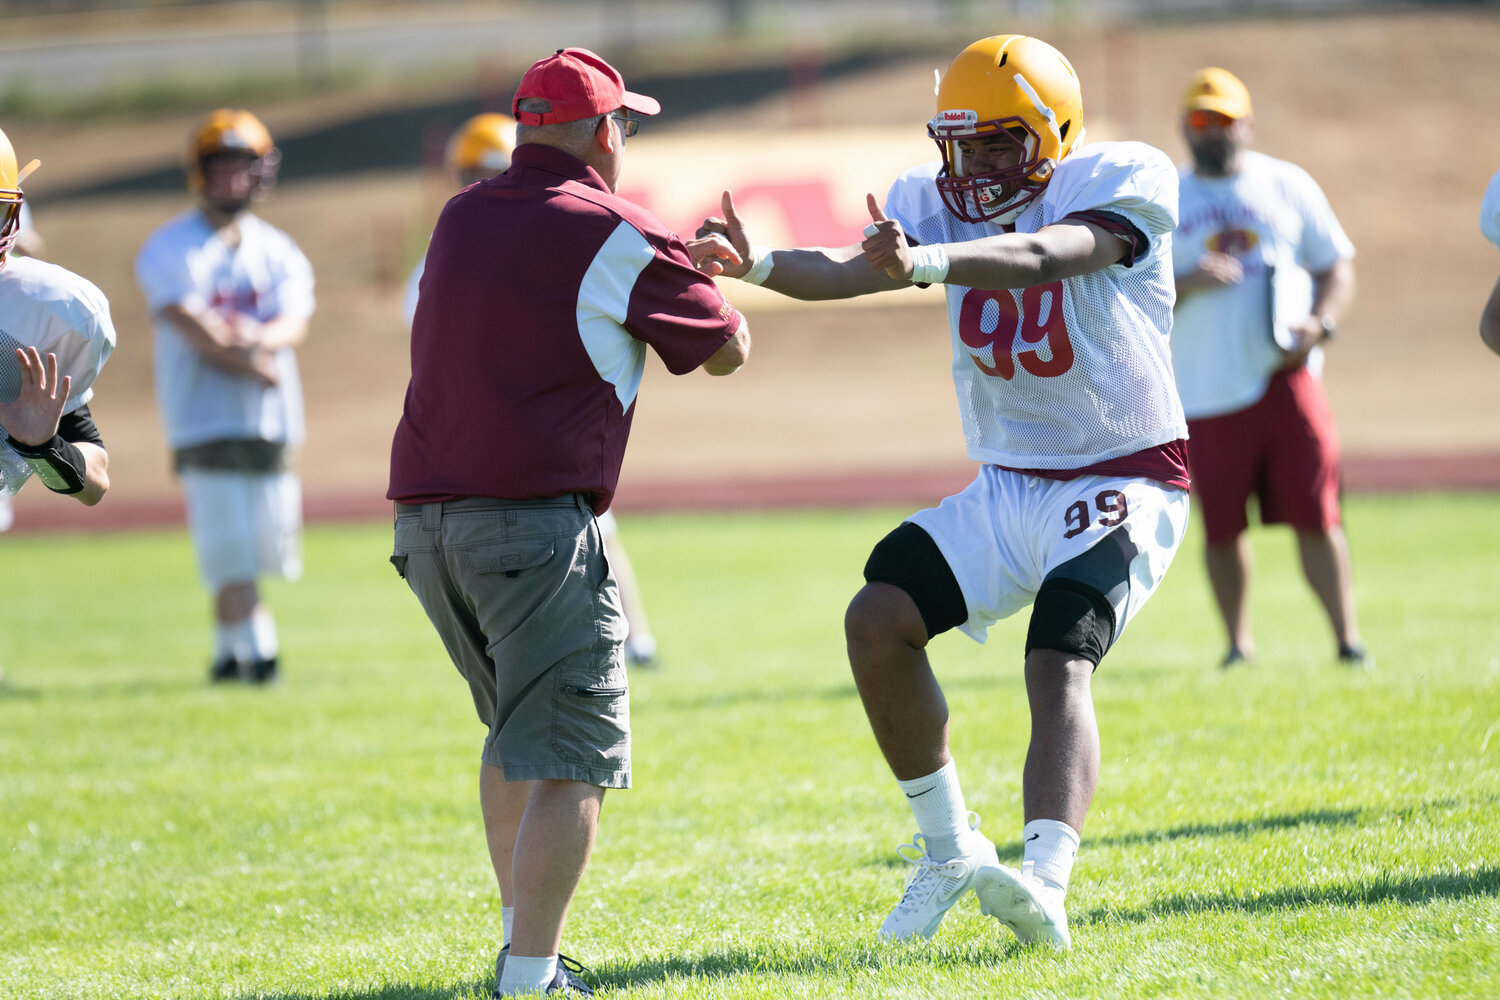 Fortune Solonio sets up a block during a drill at Winlock's Aug. 19 practice.